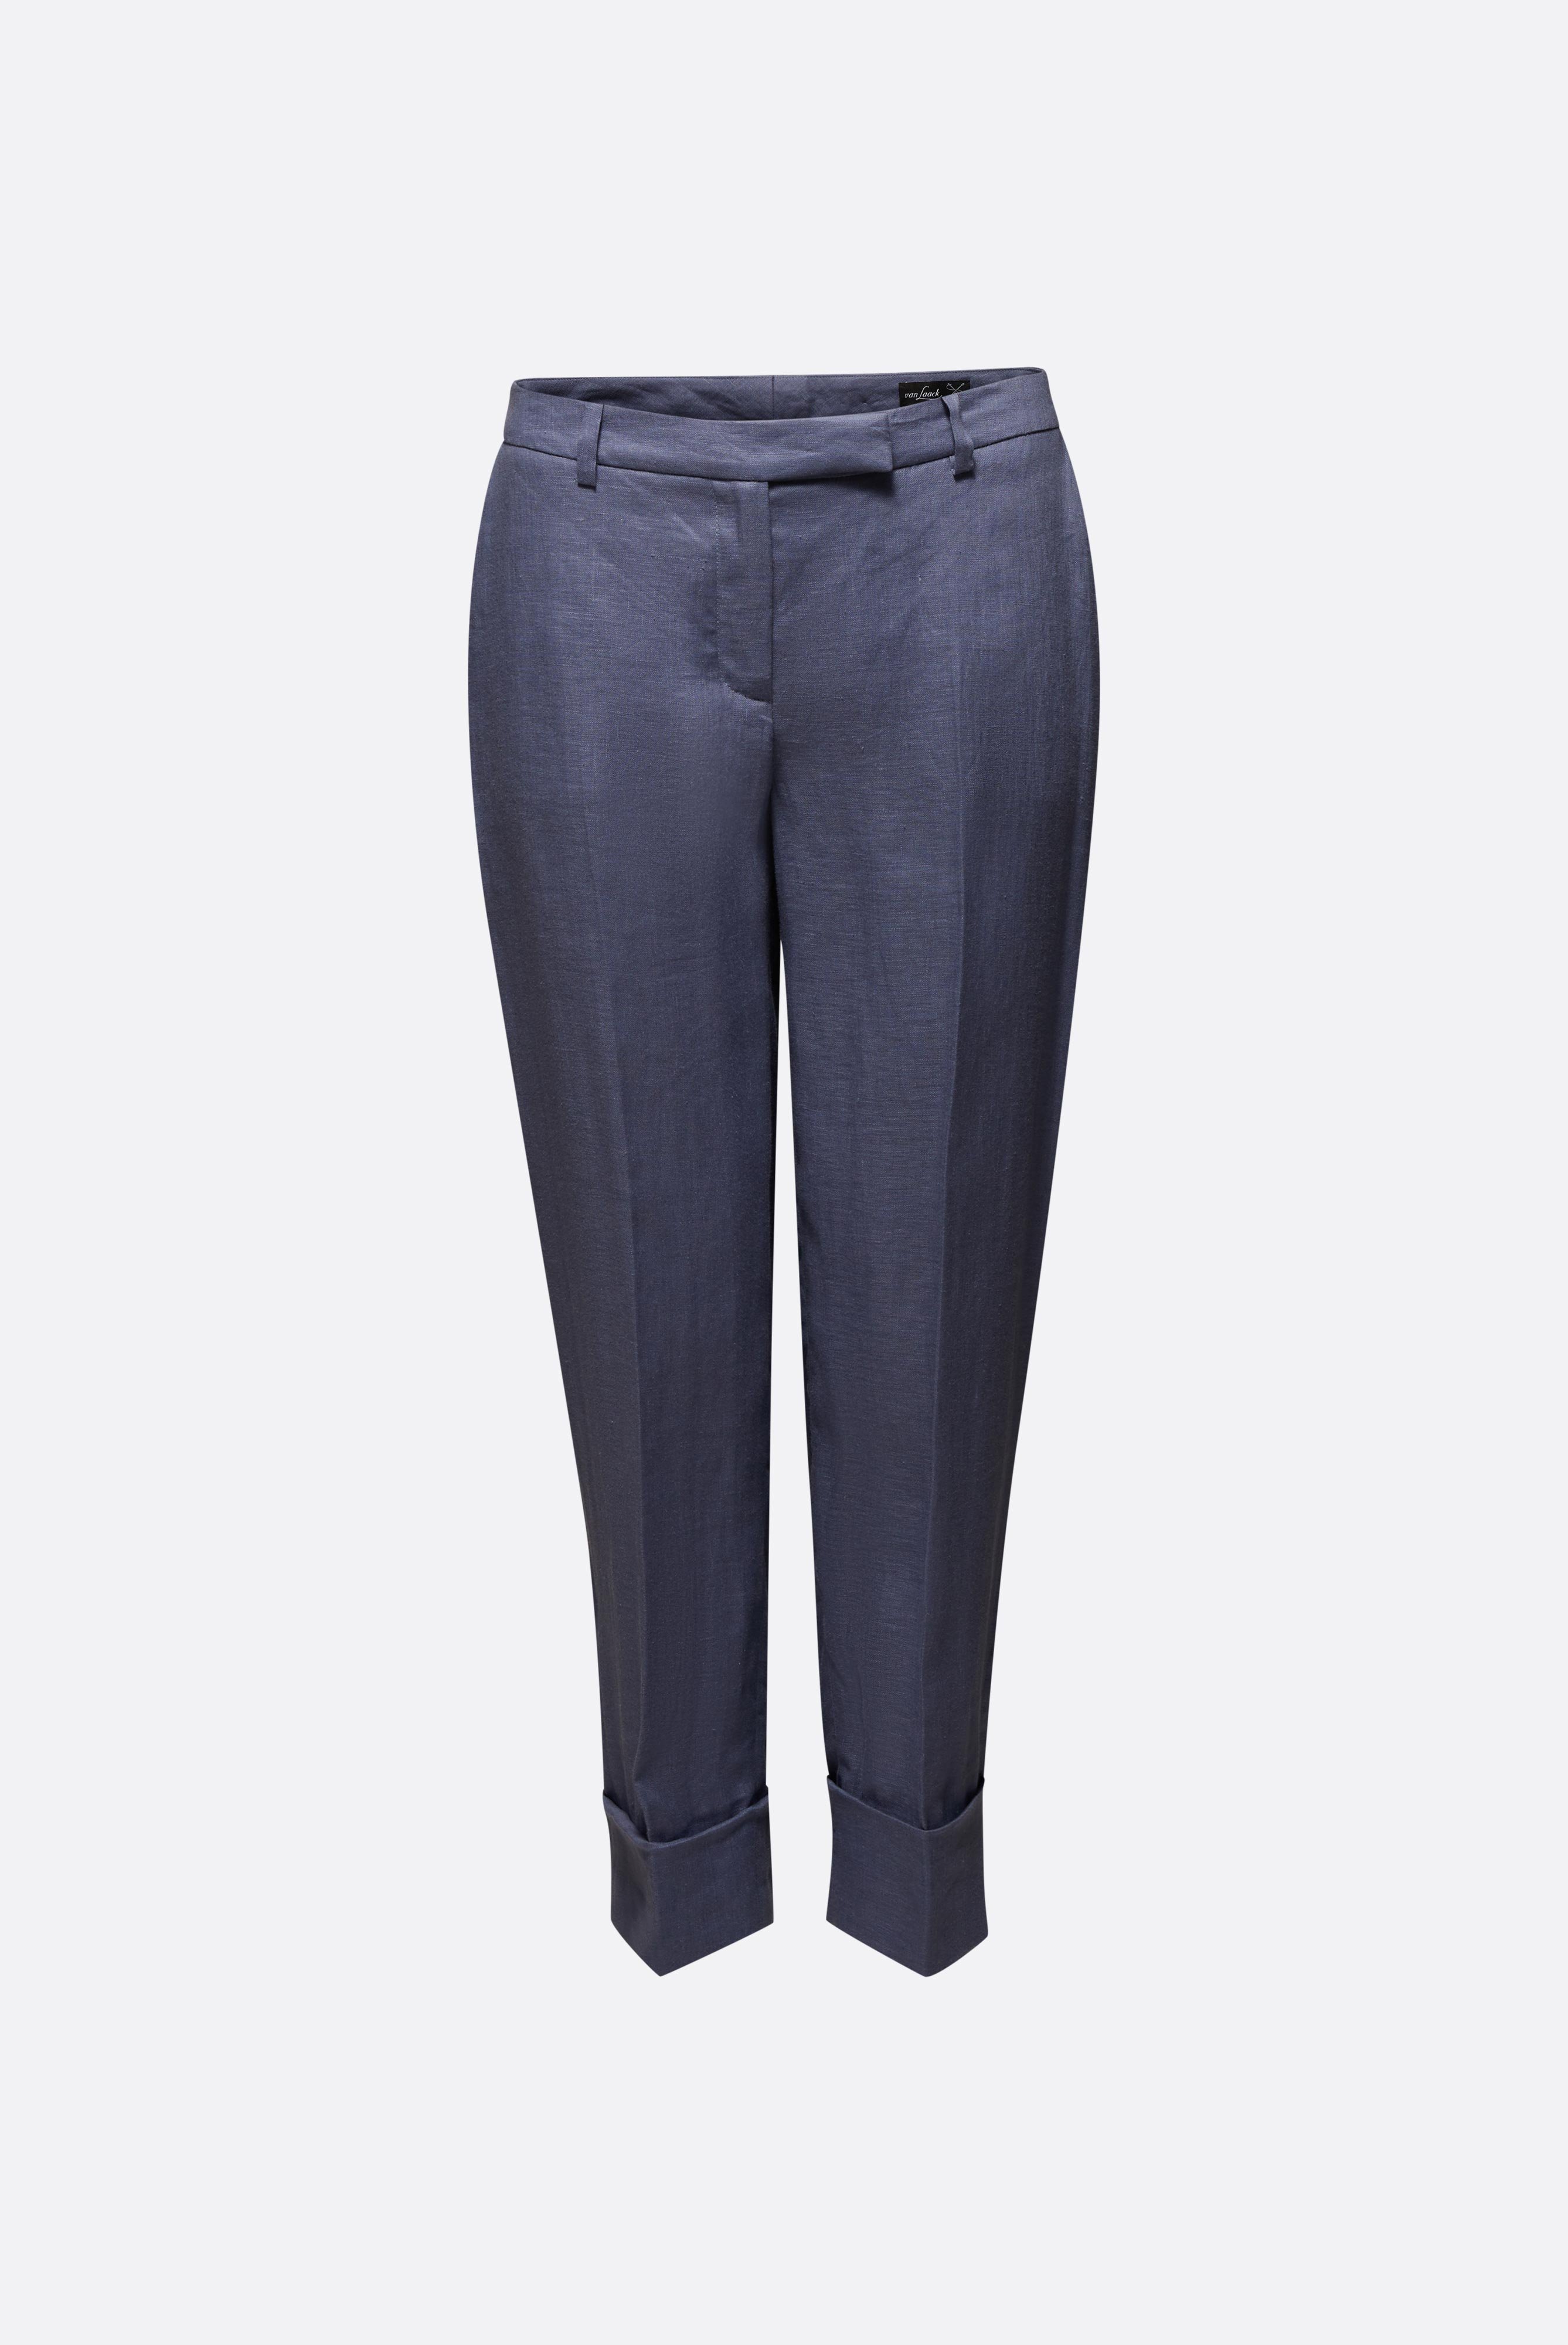 Jeans & Trousers+Linen Pants with Cuff+05.657V..H50555.680.32